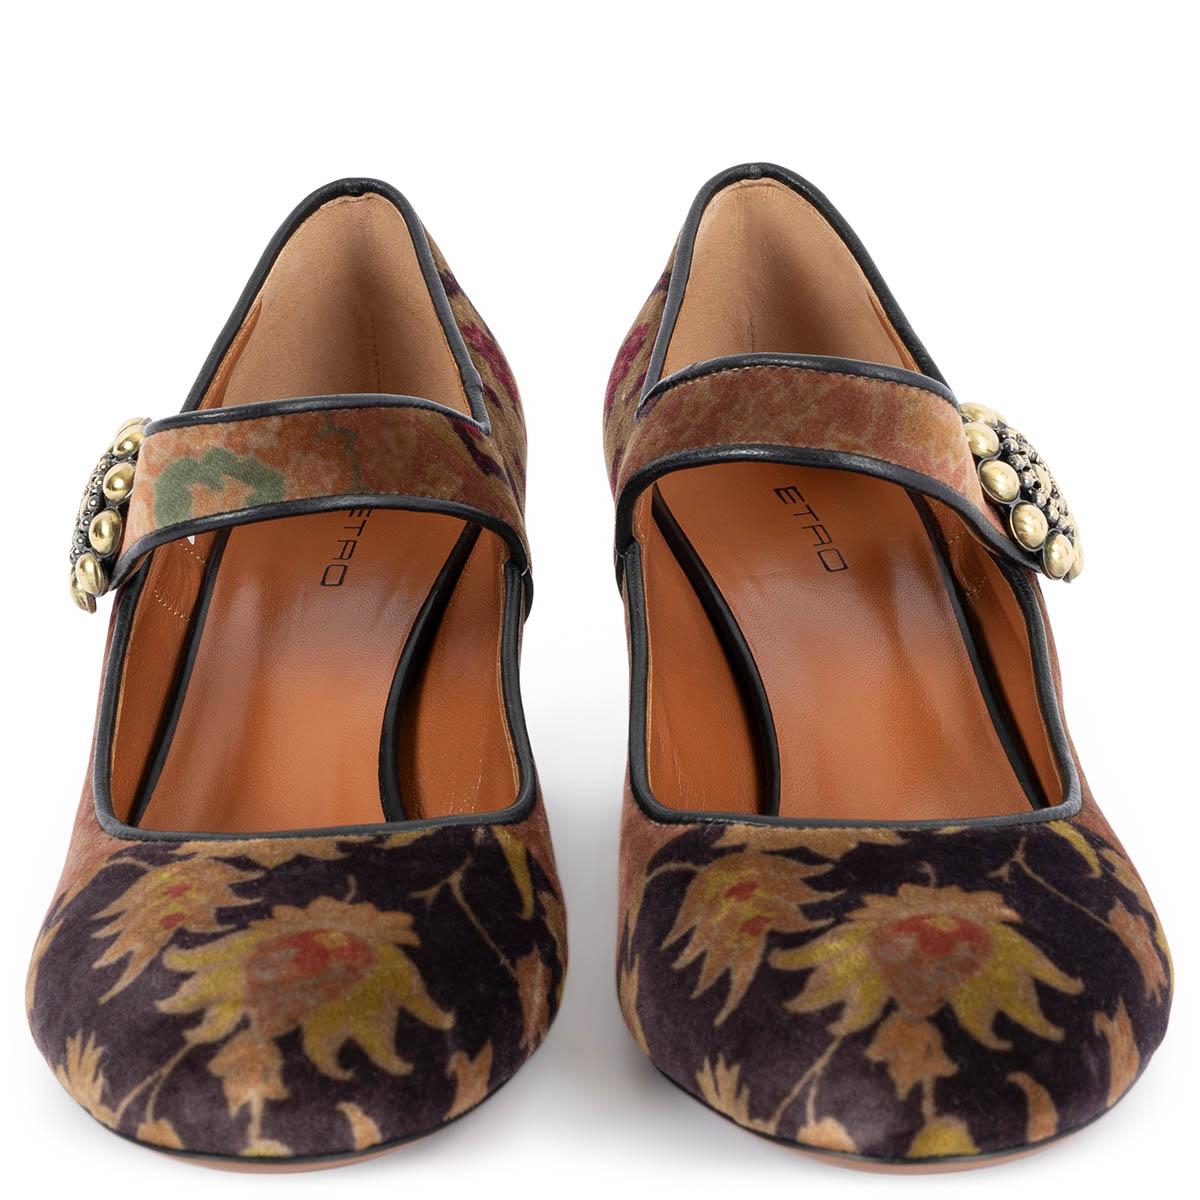 100% authentic Etro patterned mary jane block heel pumps in brown, lime, burgundy and beige velvet featuring gold-tone metal buckle. Brand new. 

Measurements
Imprinted Size	38
Shoe Size	38
Inside Sole	25cm (9.8in)
Width	7.5cm (2.9in)
Heel	6cm